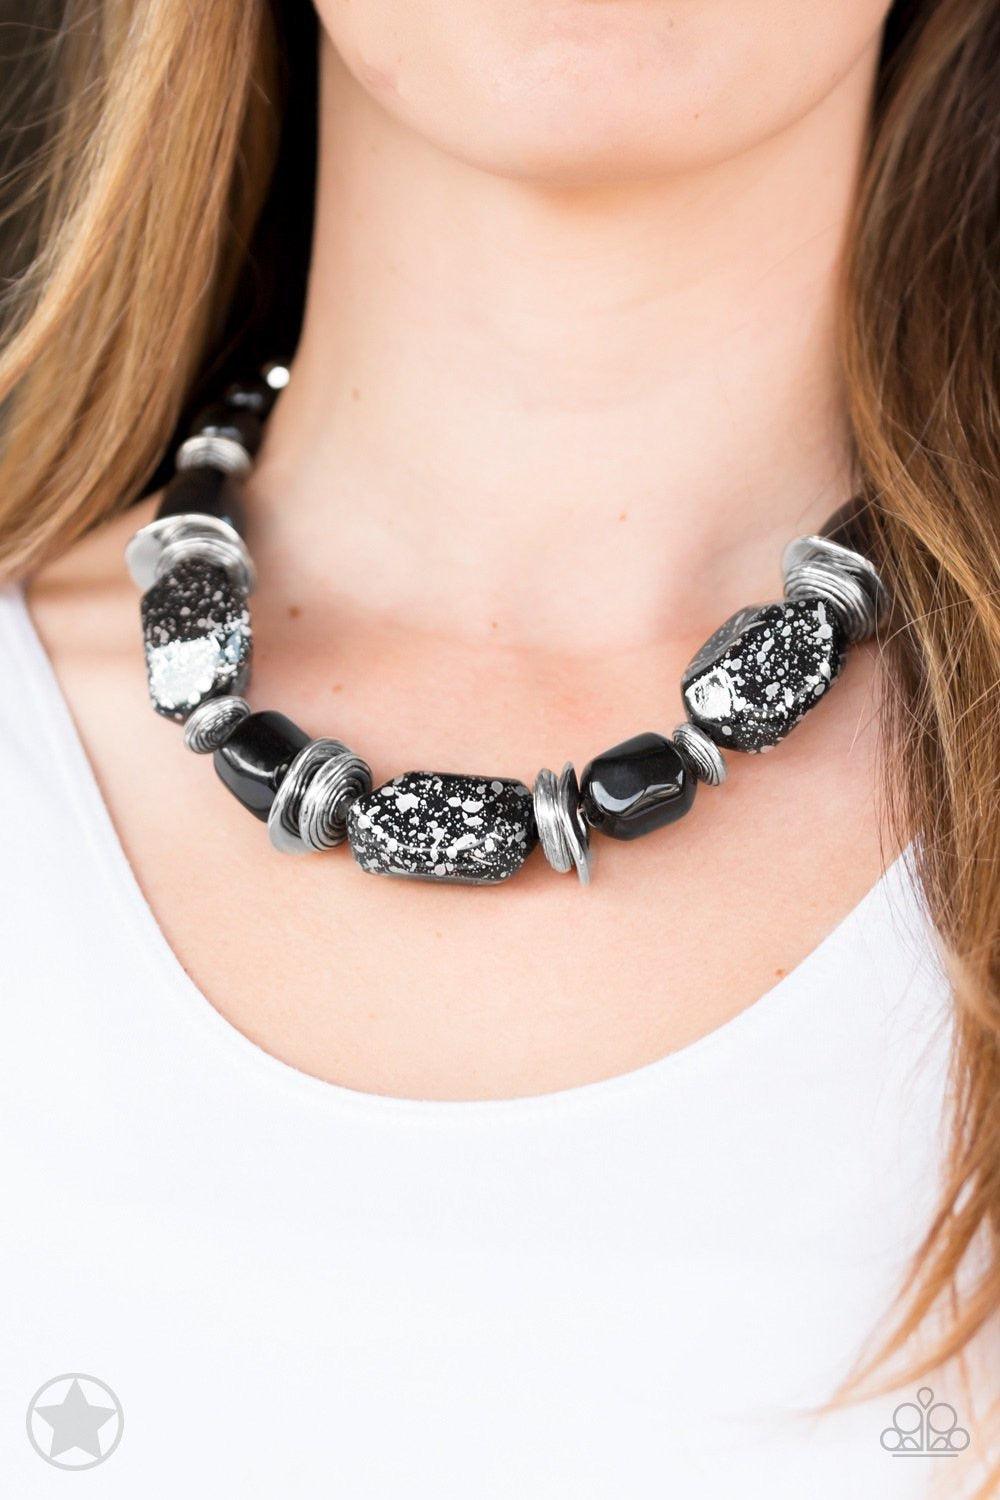 Paparazzi Accessories In Good Glazes - Black Chunky black beads with speckles of silver and a gorgeous glazed finish are threaded together with thick silver rings and smooth black beads. Features an adjustable clasp closure. Jewelry